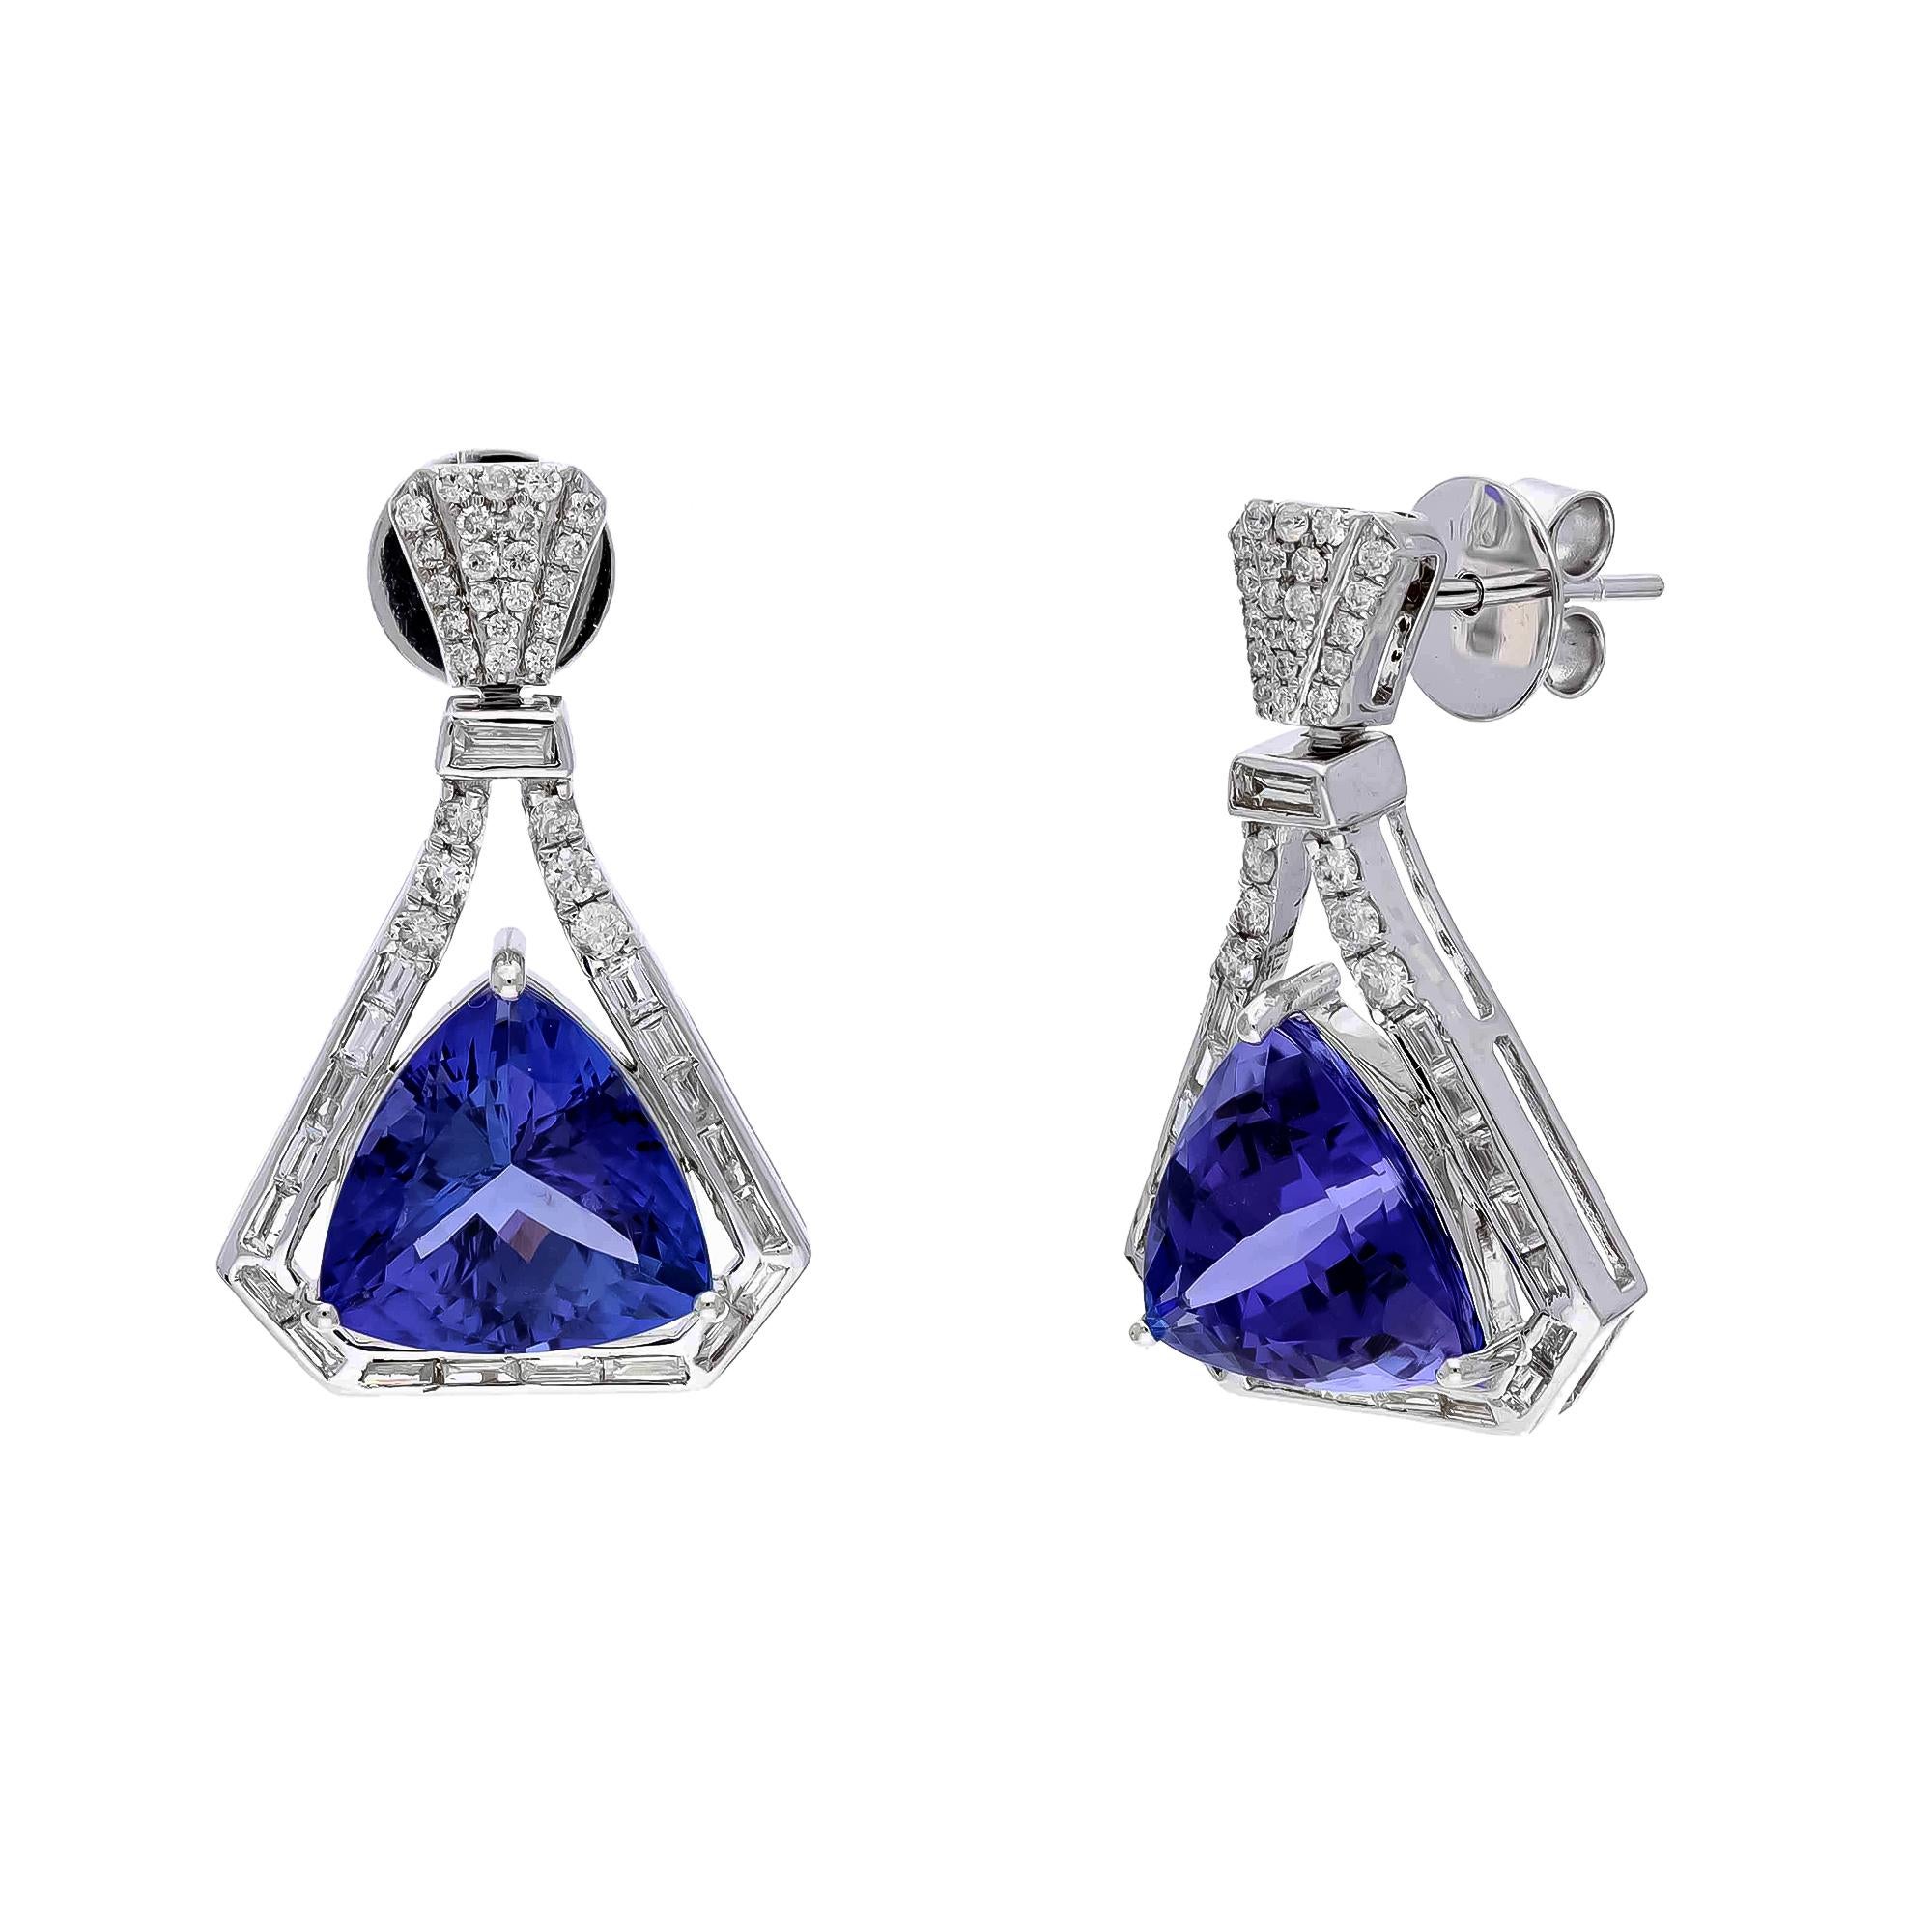 diamonds 1.06cts
tanzanite 10.16cts
gold 7.49gms



It’s very hard to capture the true color and luster of the stone, I have tried to add pictures which are taken professionally and by me from my I phone to reflect the true image of the item.
Most